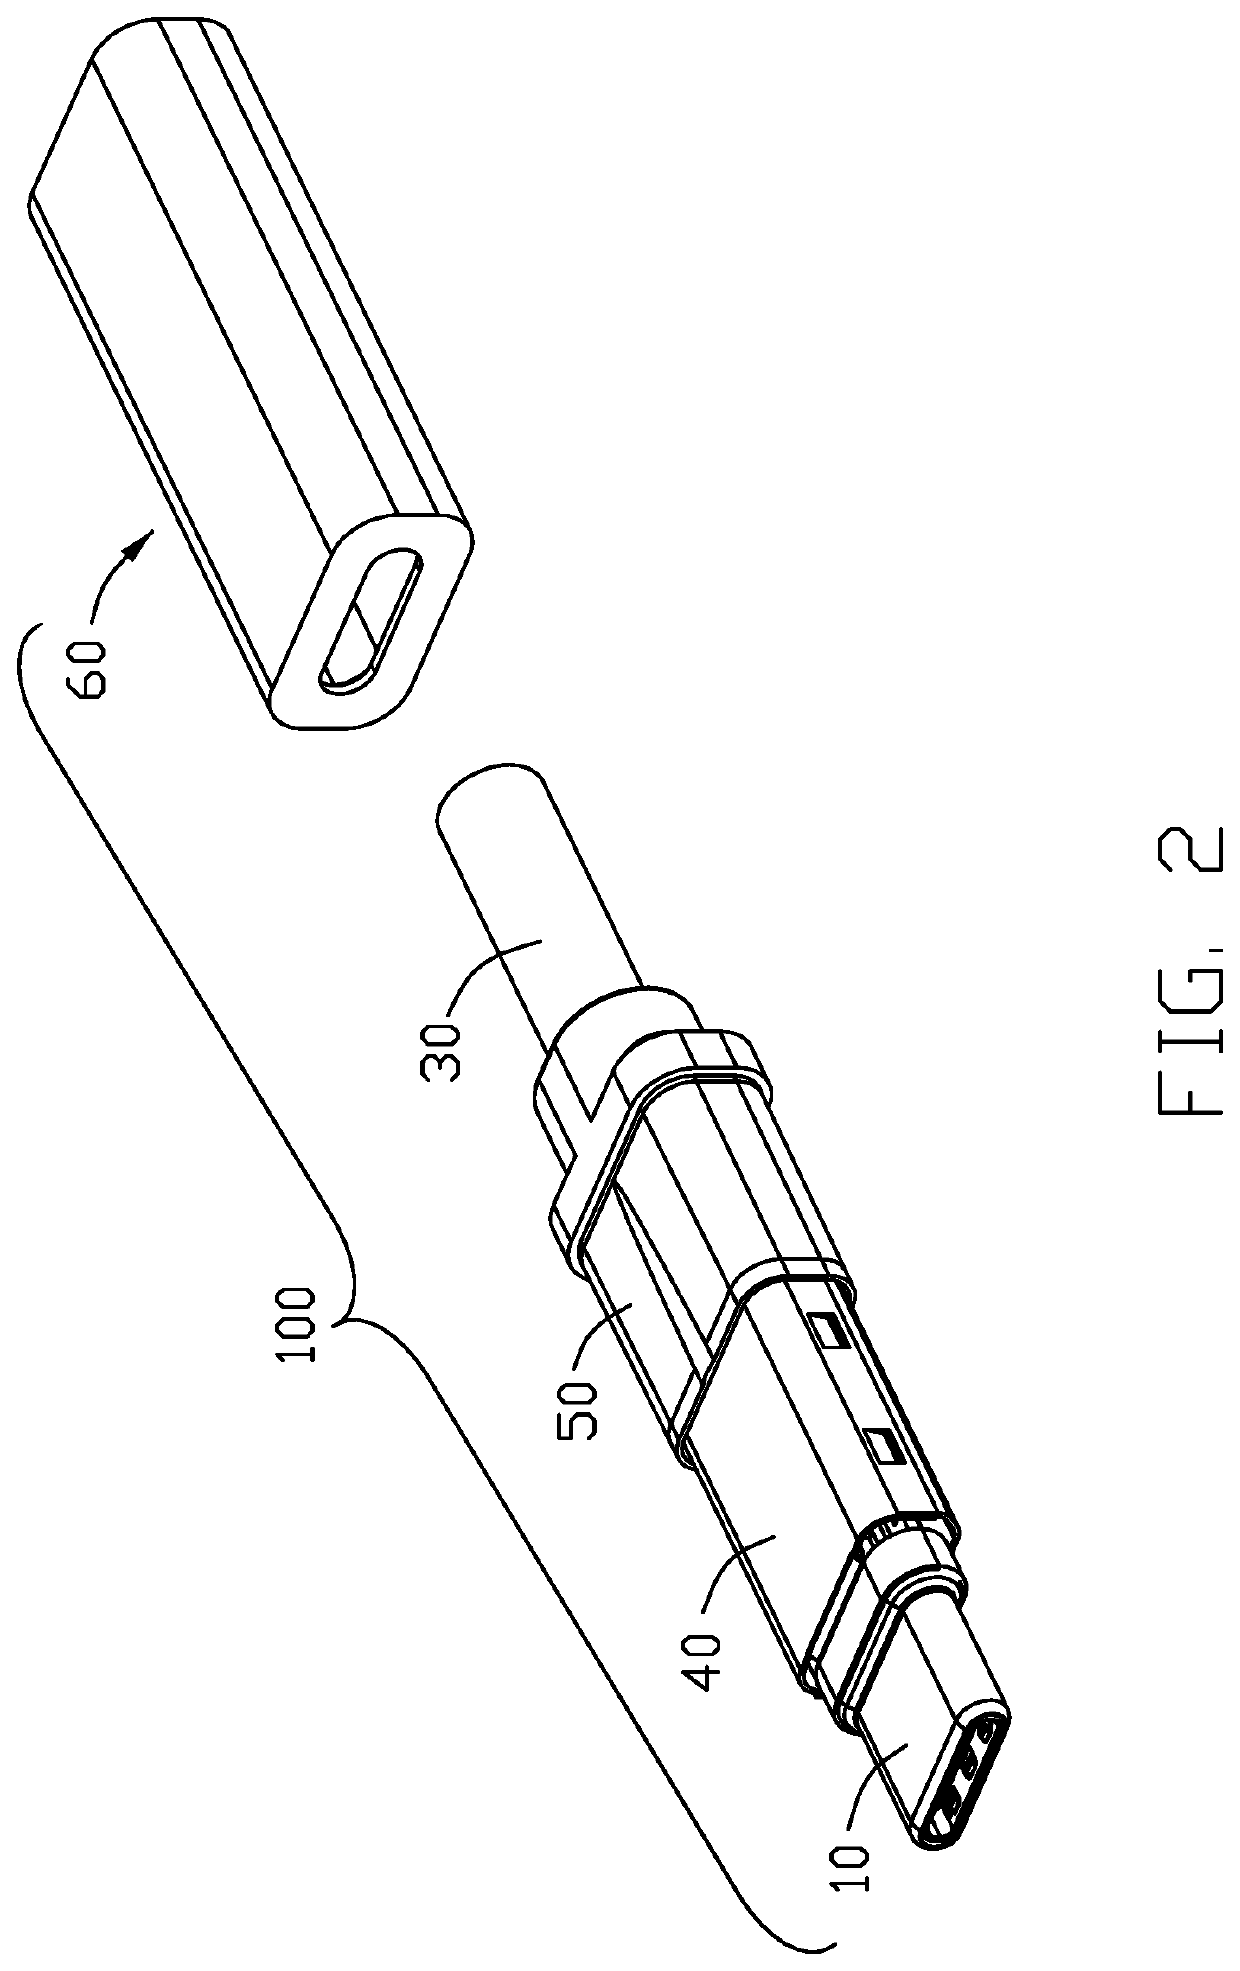 Cable connector assembly including coaxial wires and single core wires